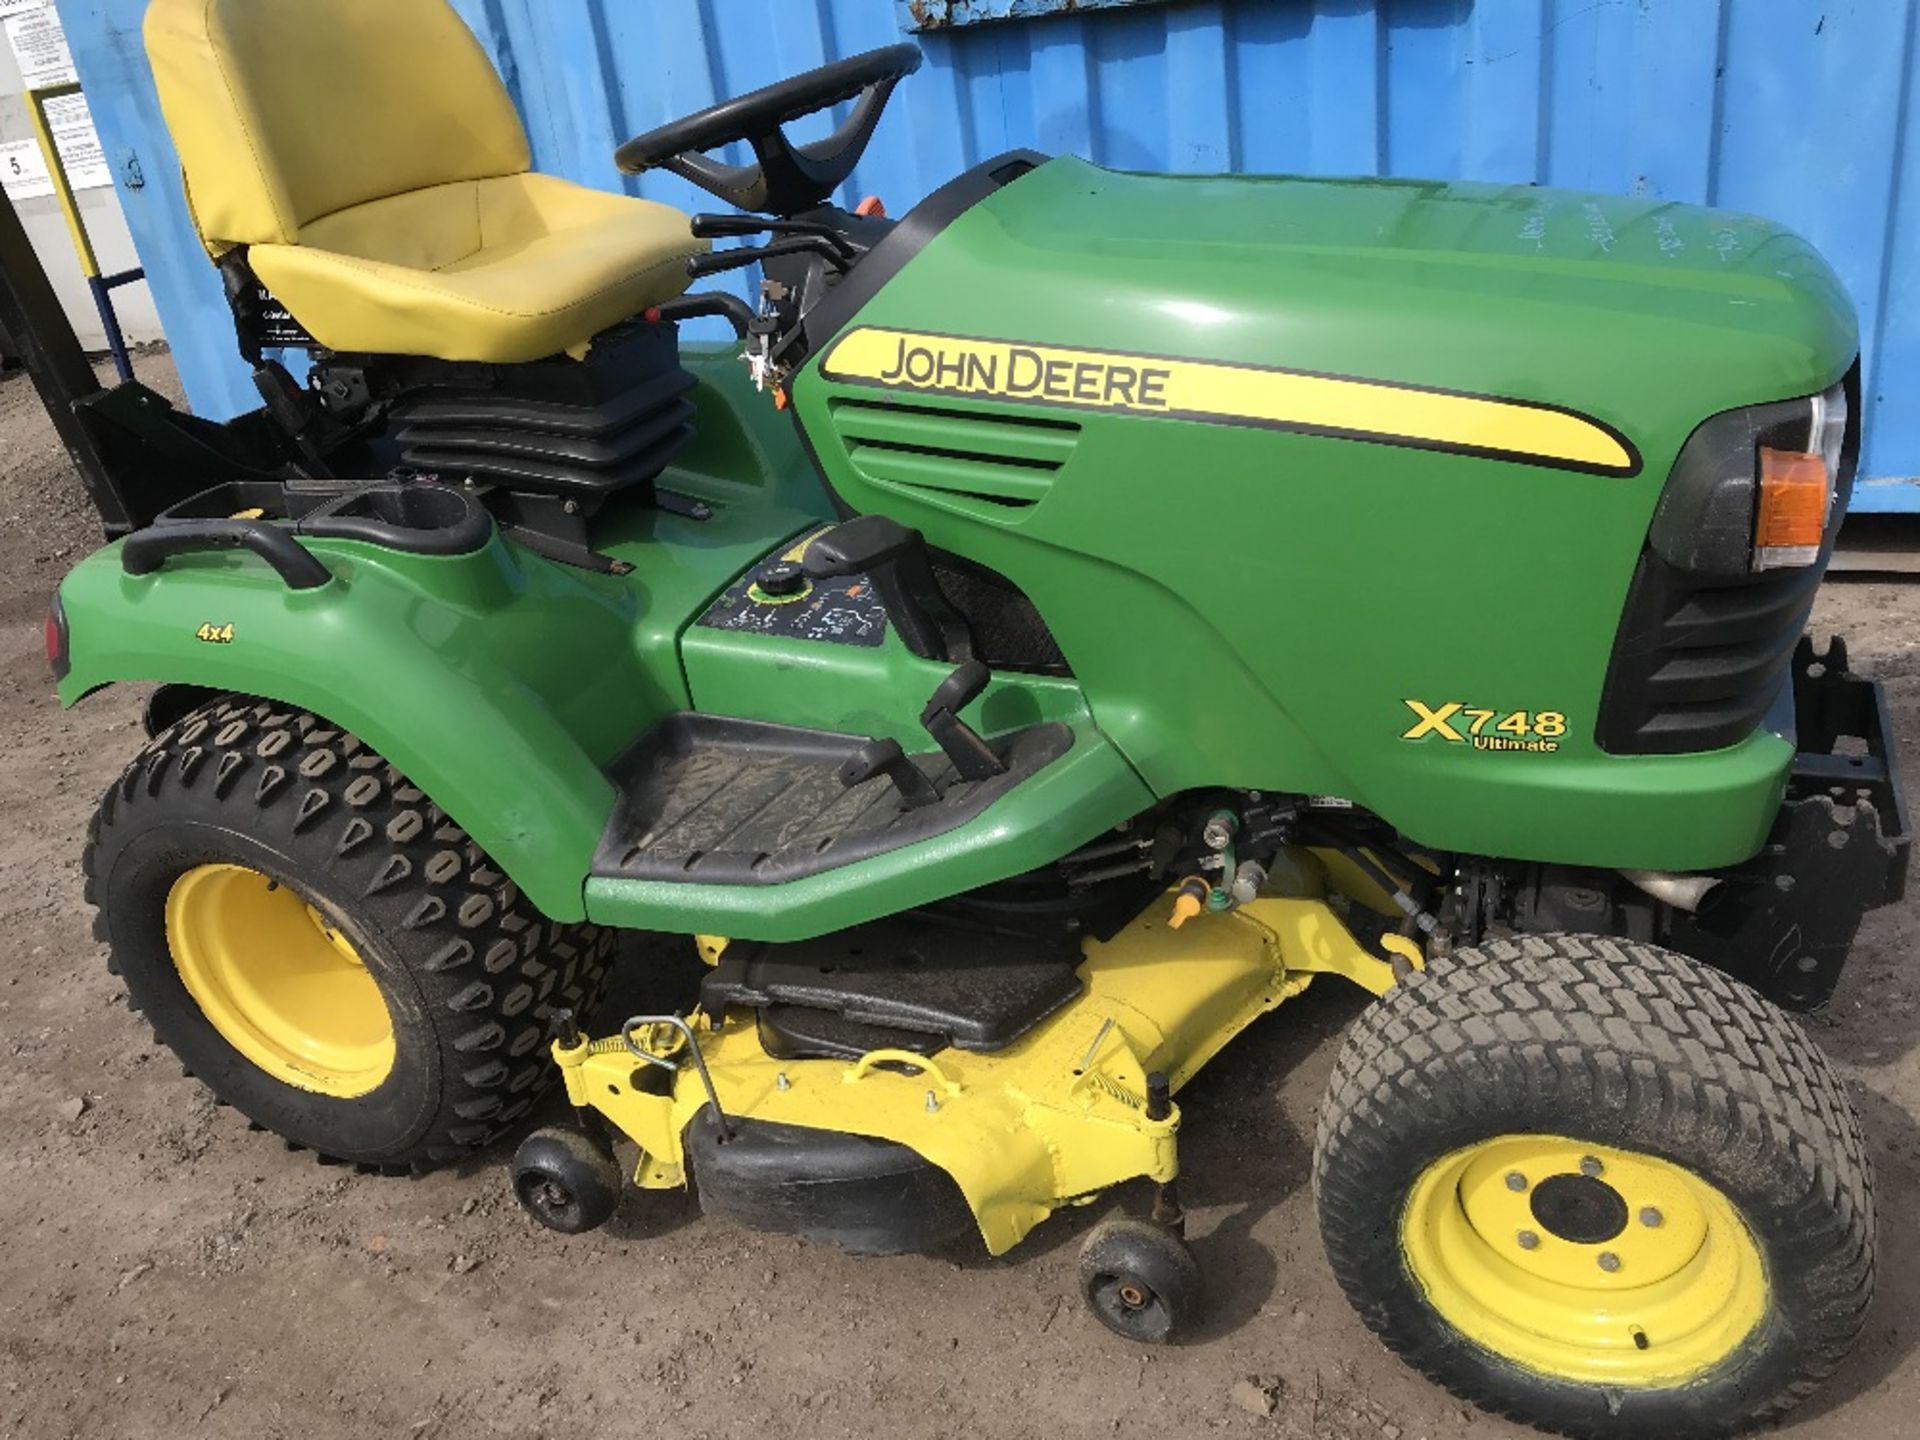 JOHN DEERE X748 ULTIMATE 4WD RIDE ON MOWER YEAR 2009 622 RECORDED HRS HYDRAULIC LIFTING CUTTER